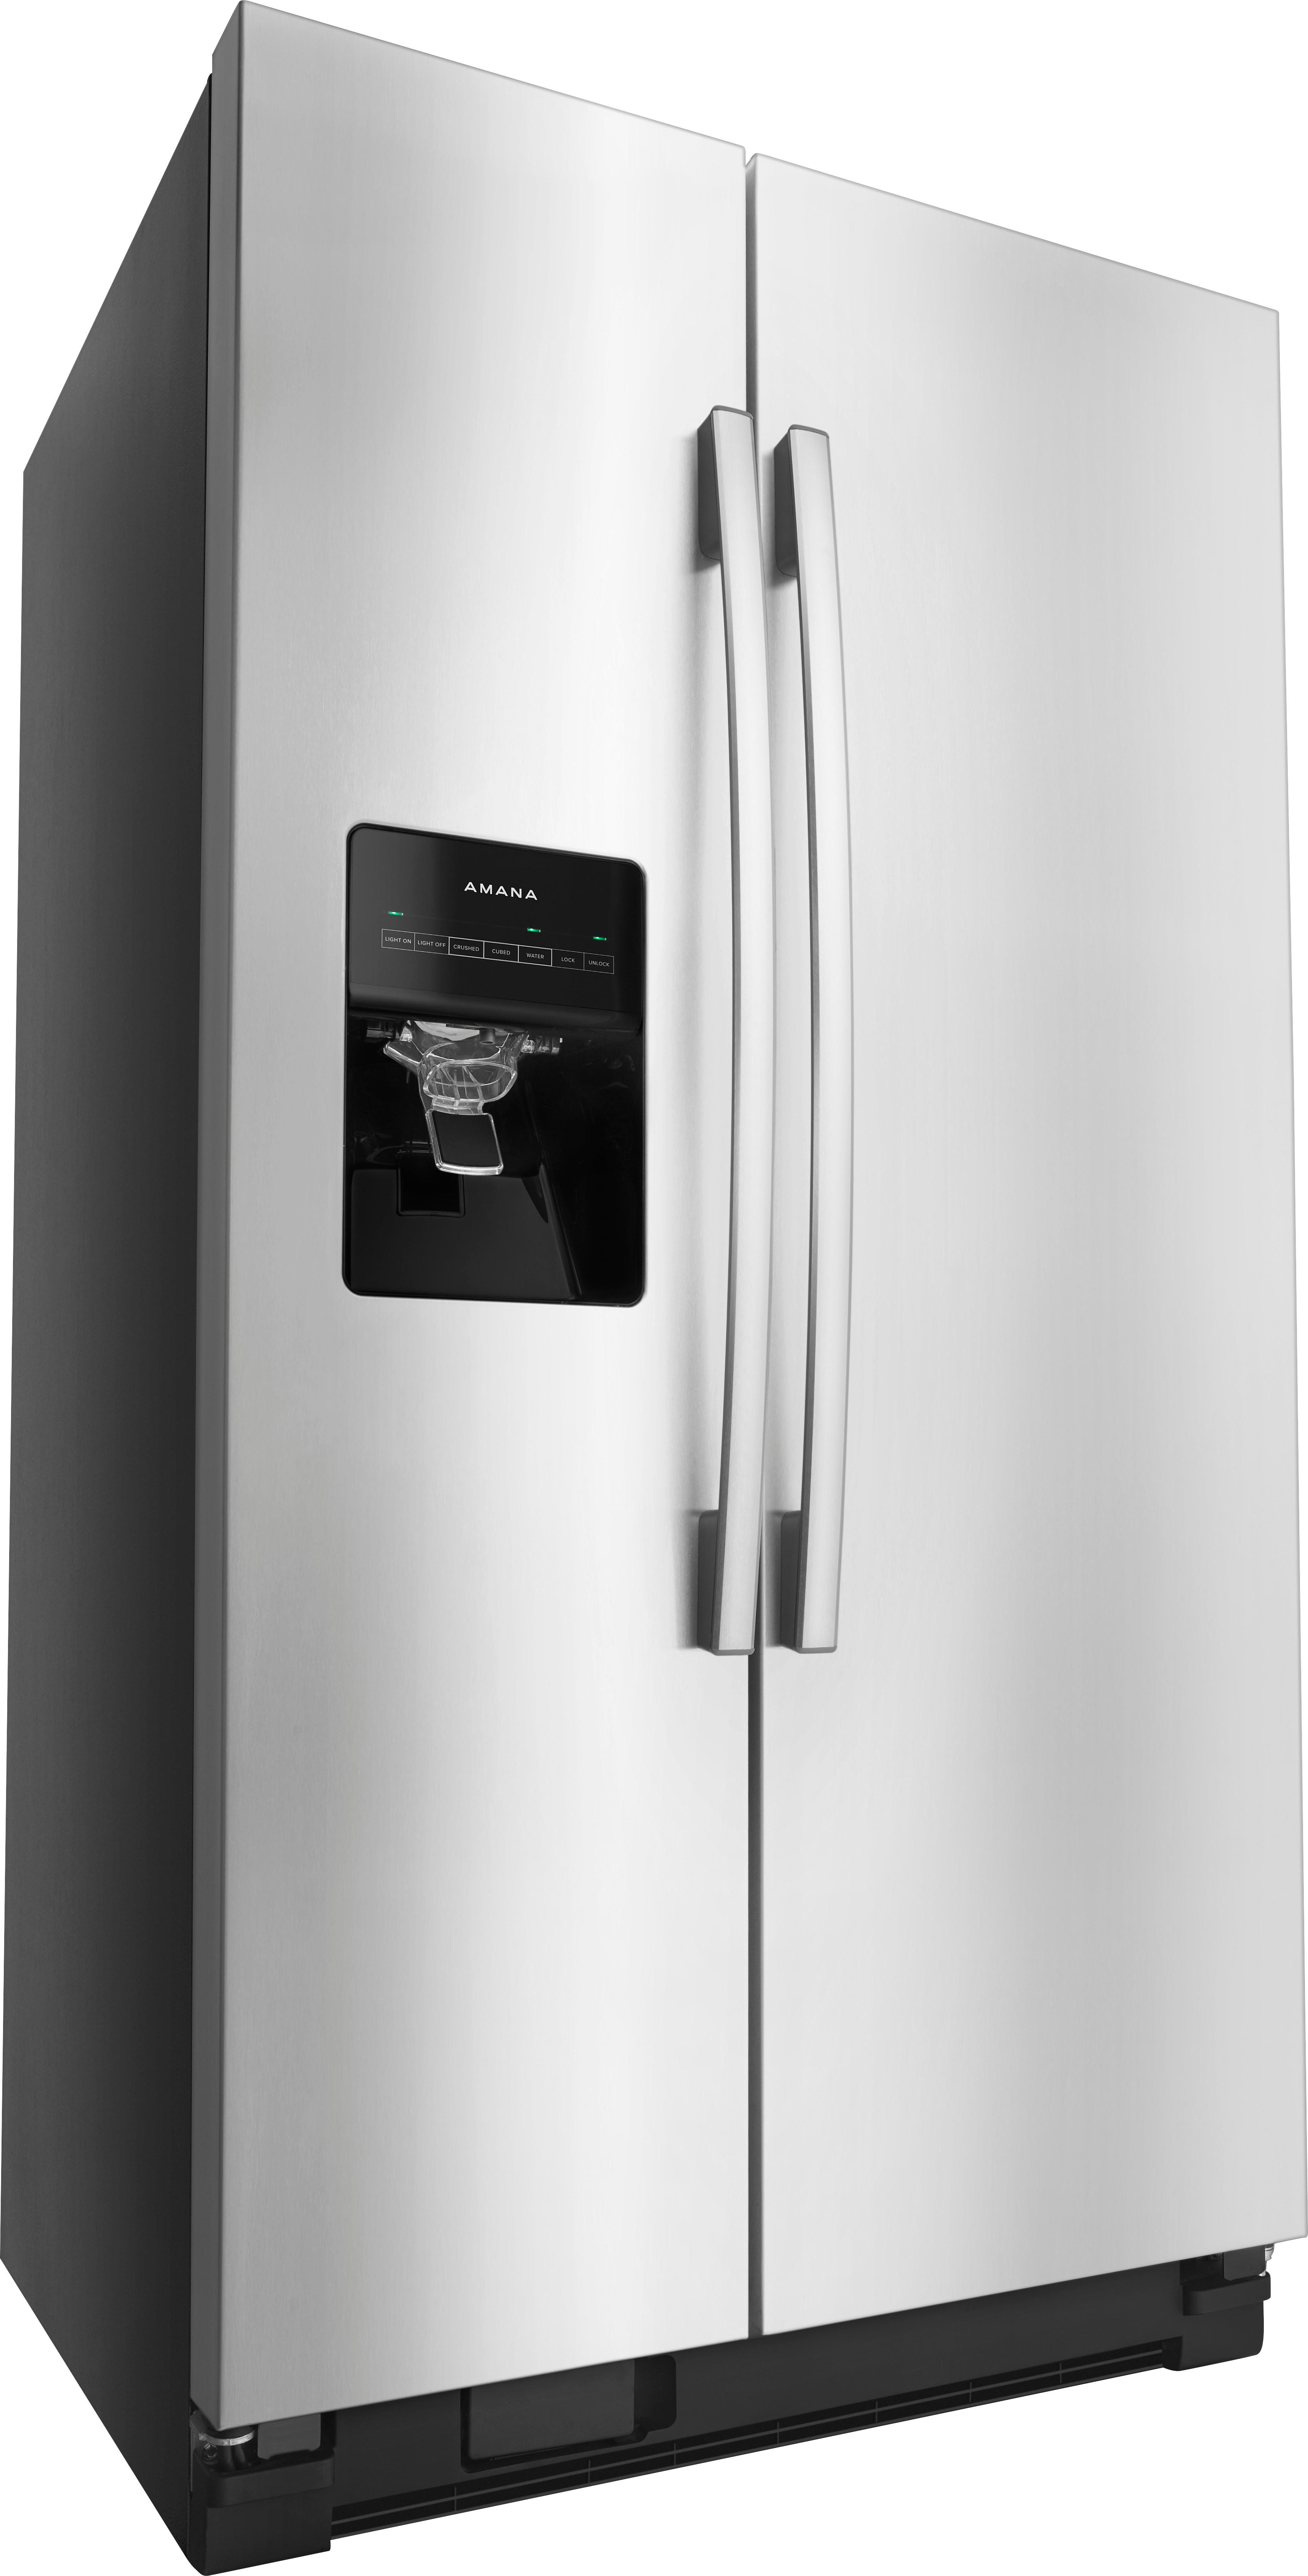 Customer Reviews: Amana 24.5 Cu. Ft. Side-by-Side Refrigerator ...